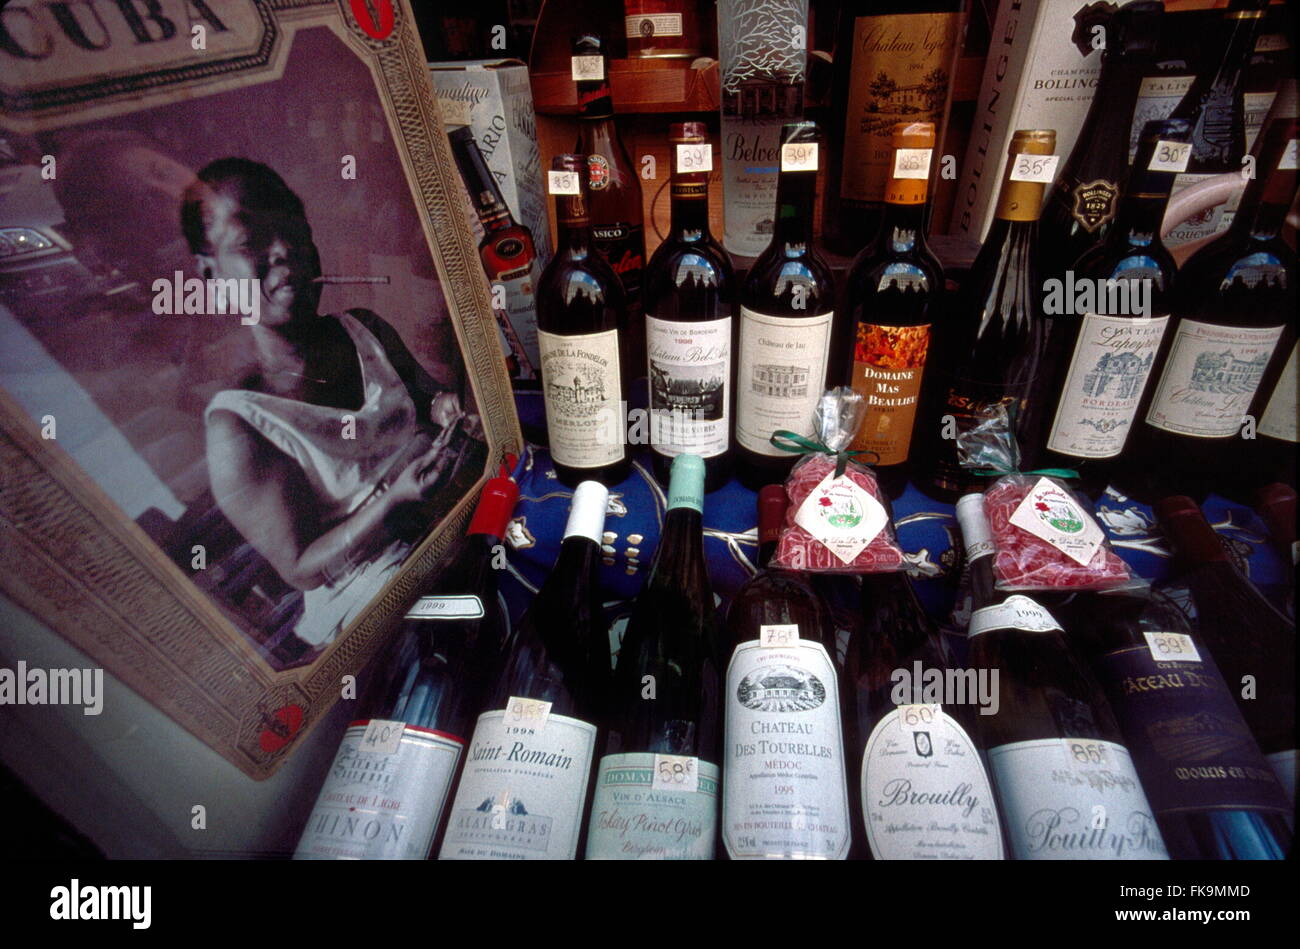 AJAXNETPHOTO. PARIS, FRANCE. - SELECT WINES ON SALE - A WINE MERCHANT WINDOW DISPLAY OF LATE 1990S WINES ON SALE WITH PRICE LABELS IN FRENCH FRANCS.  PHOTO:JONATHAN EASTLAND/AJAX  REF:101256 Stock Photo